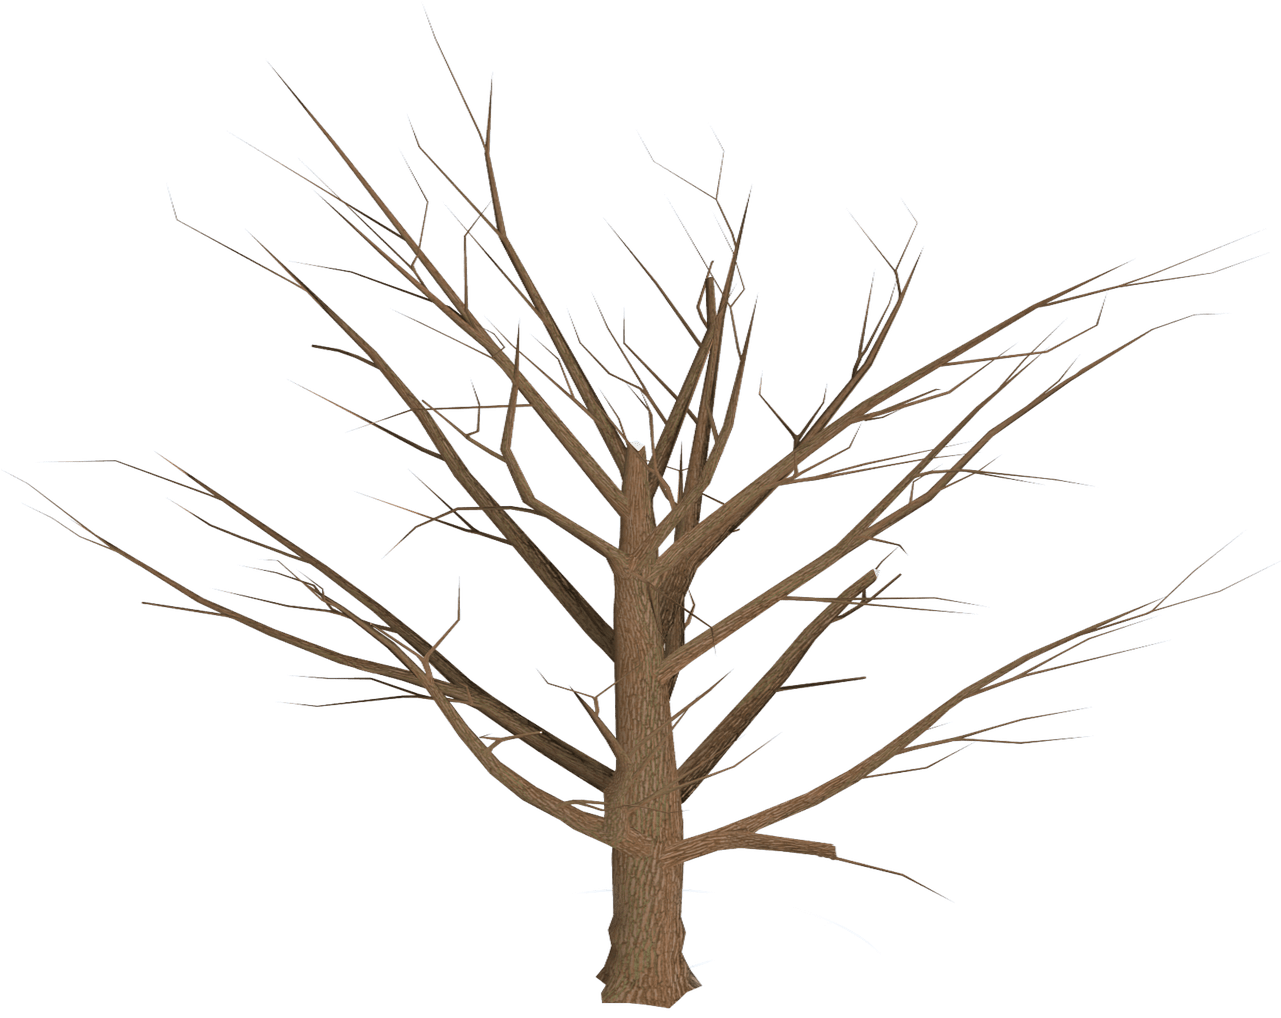 Bare Tree Blue Sky Background PNG